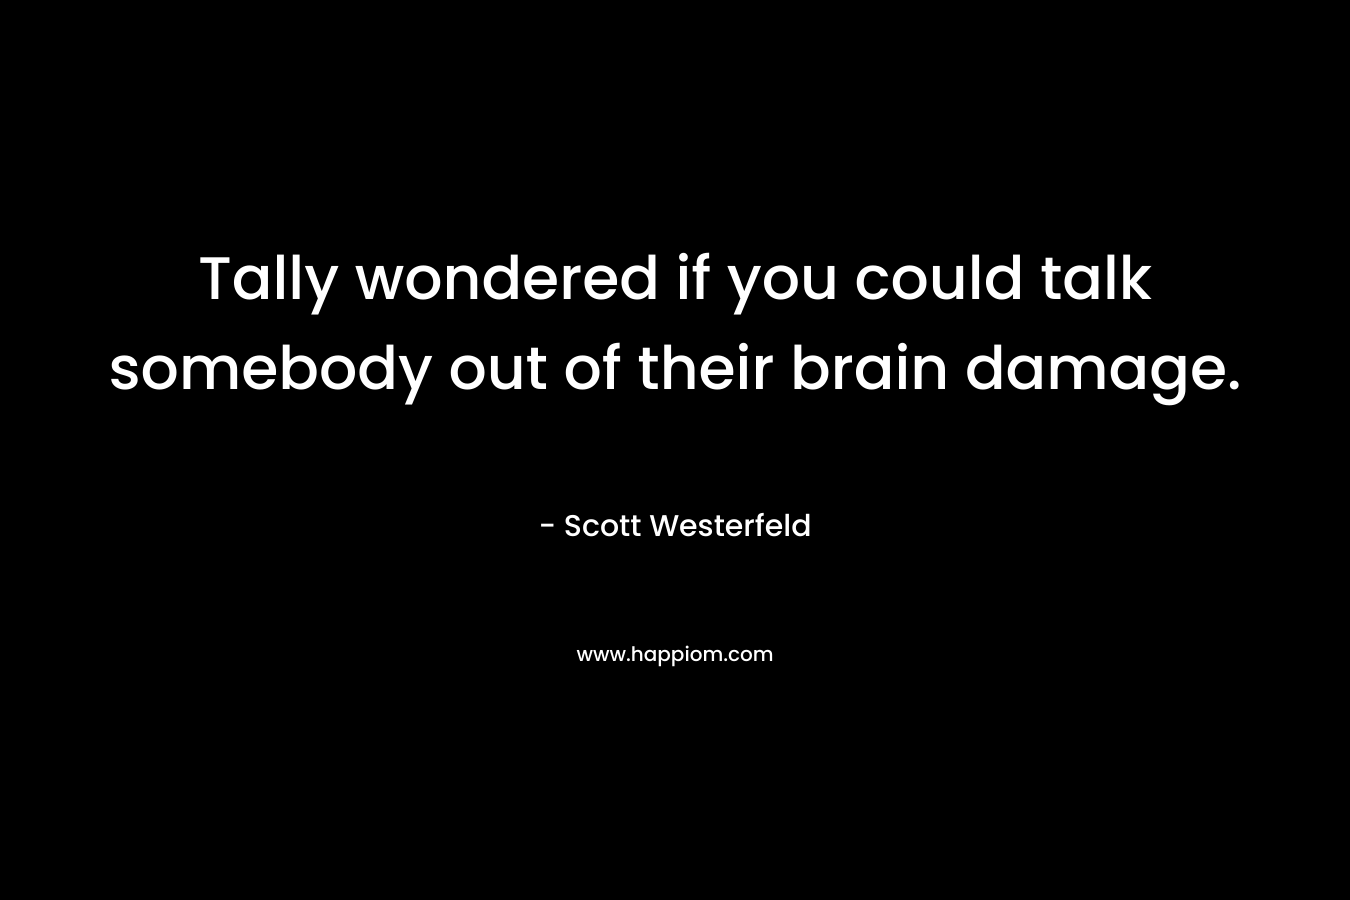 Tally wondered if you could talk somebody out of their brain damage. – Scott Westerfeld